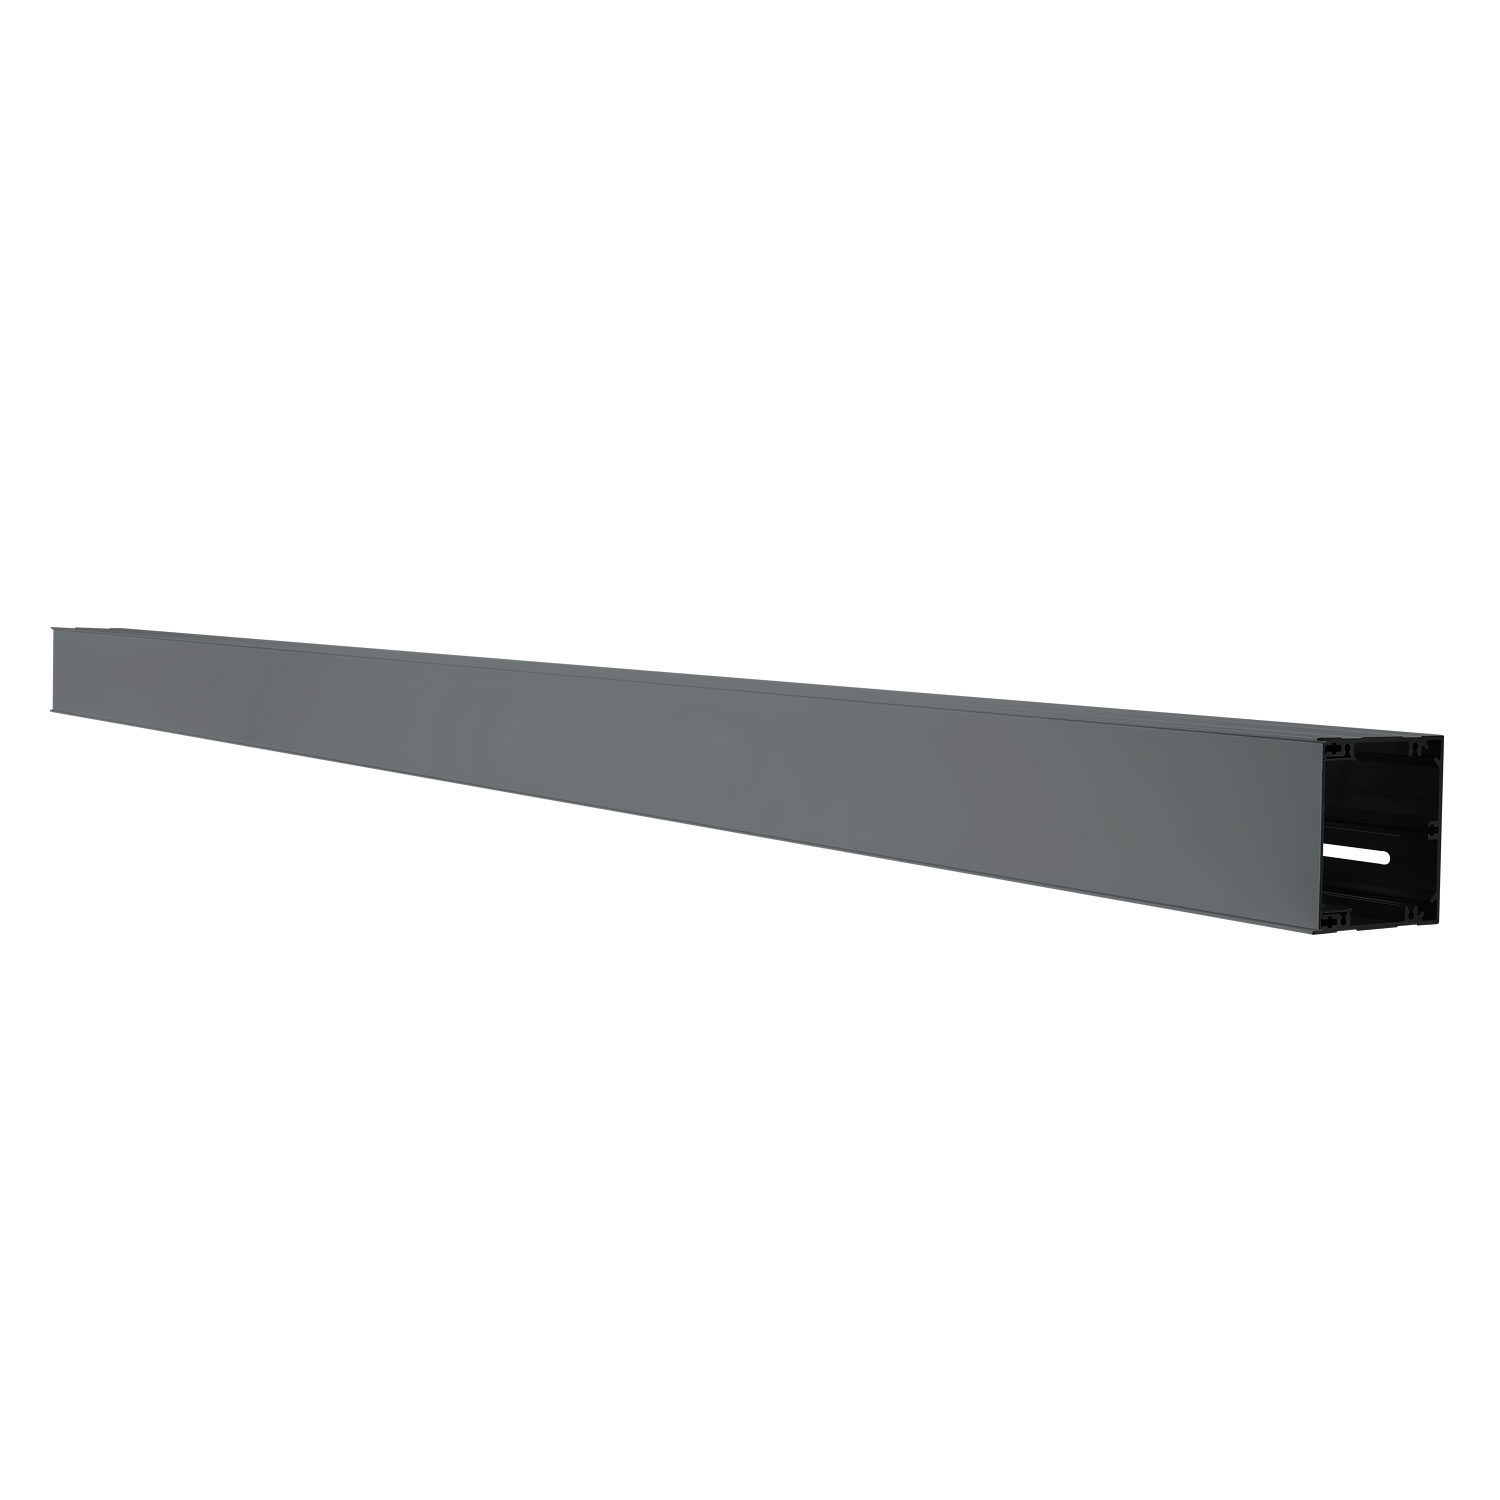 SYSTRUNK Duct/column profile , 56 BE, colour: grey